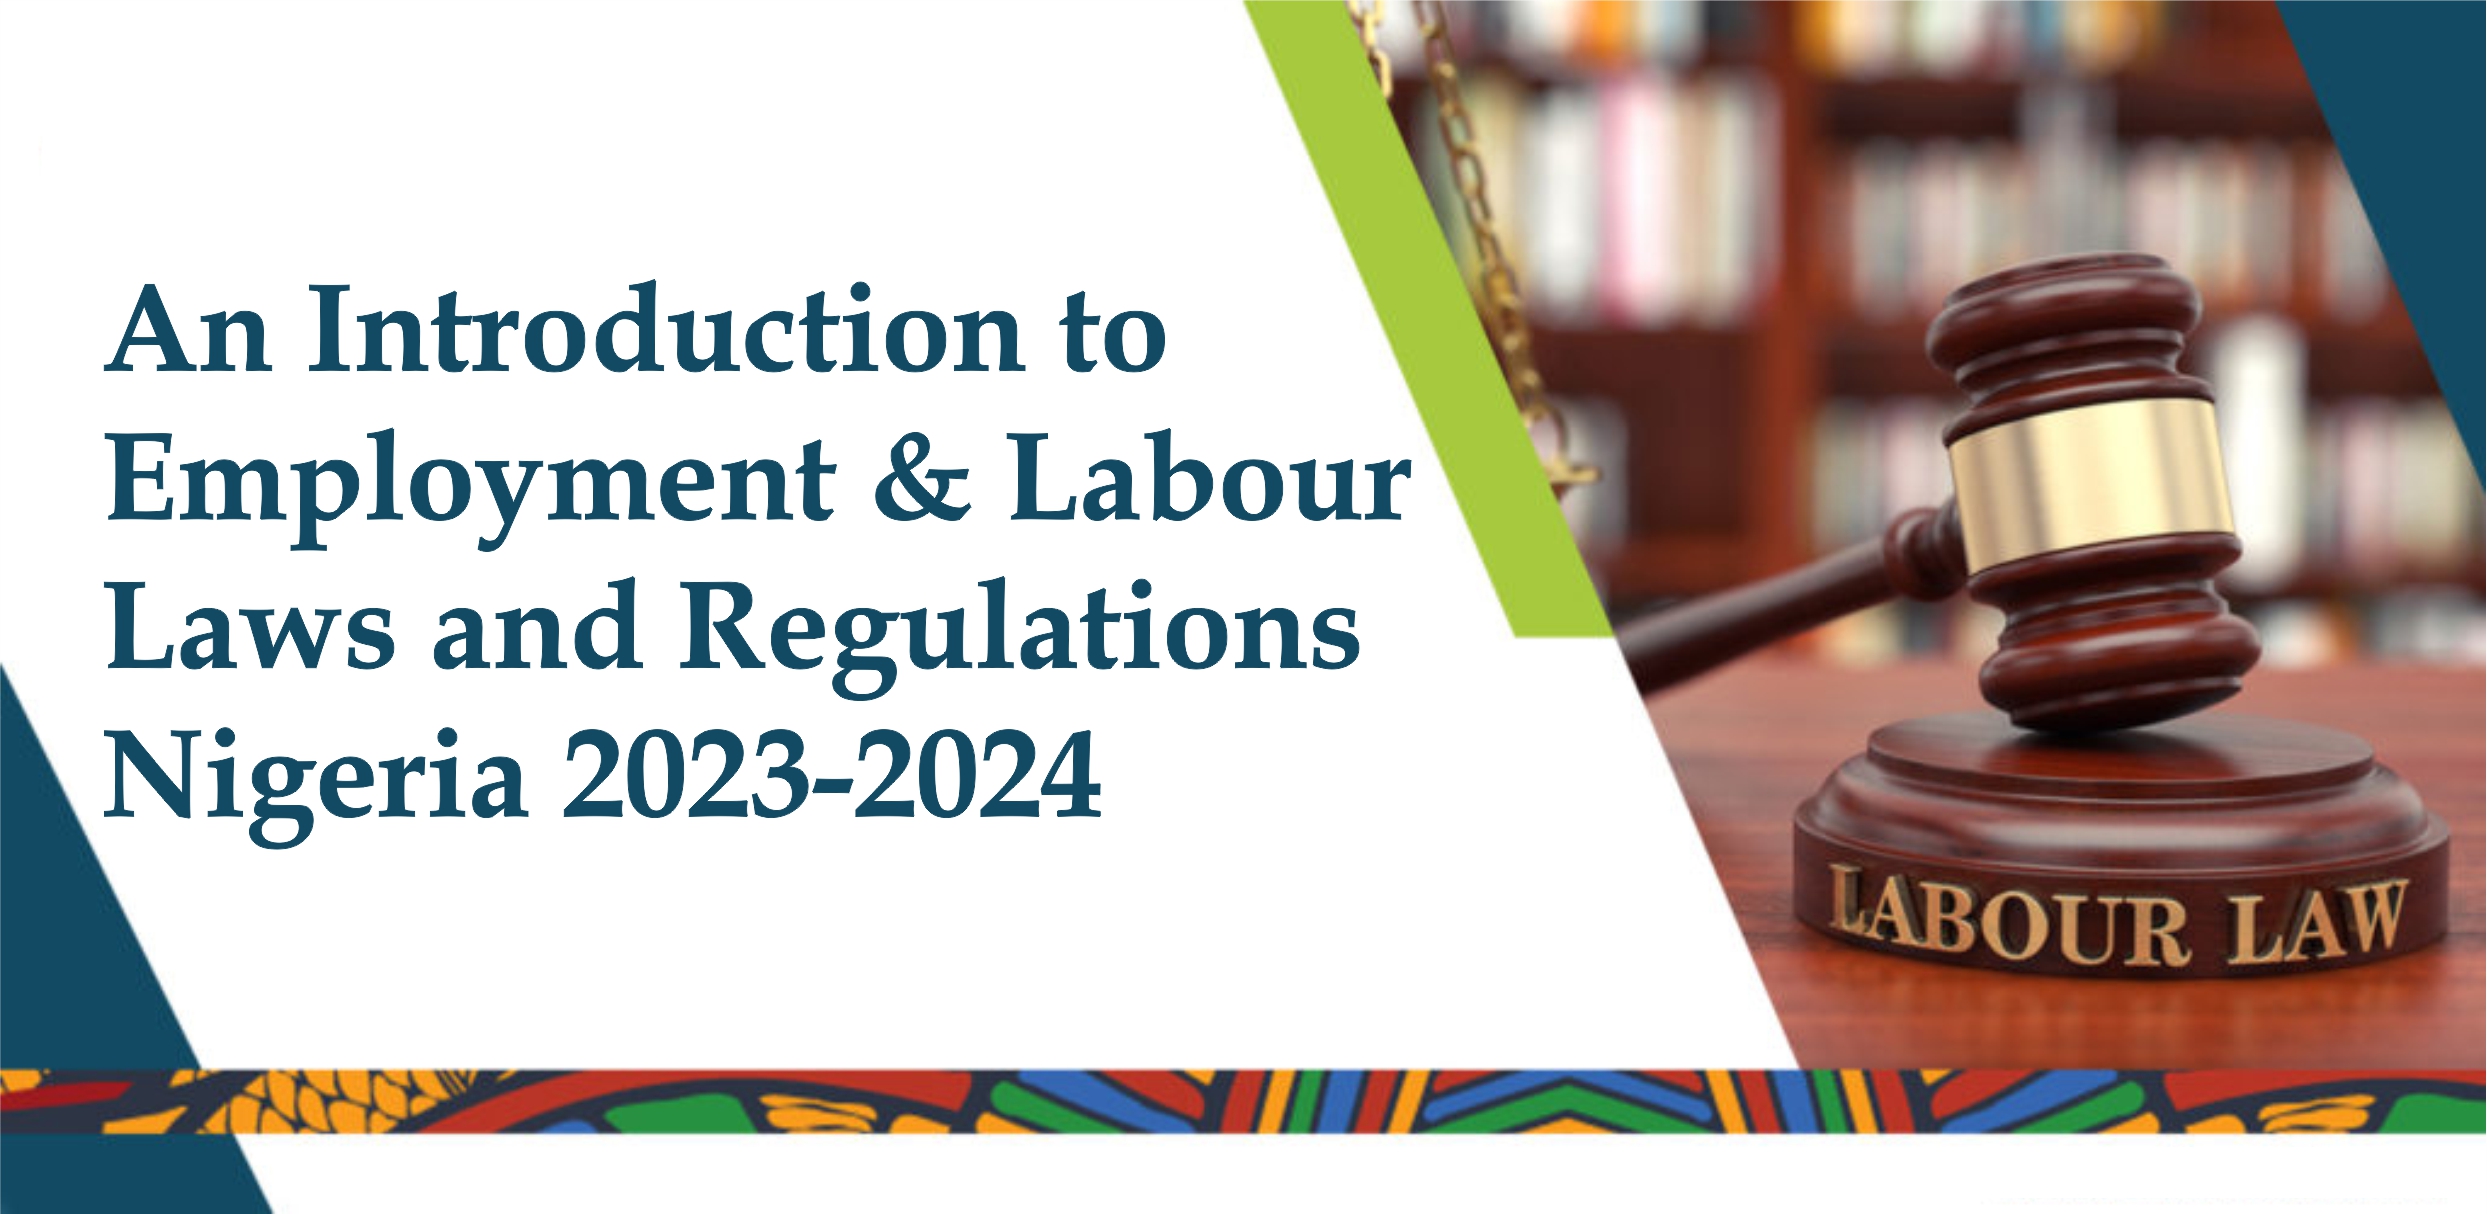 An Introduction to Employment & Labour Laws and Regulations in Nigeria